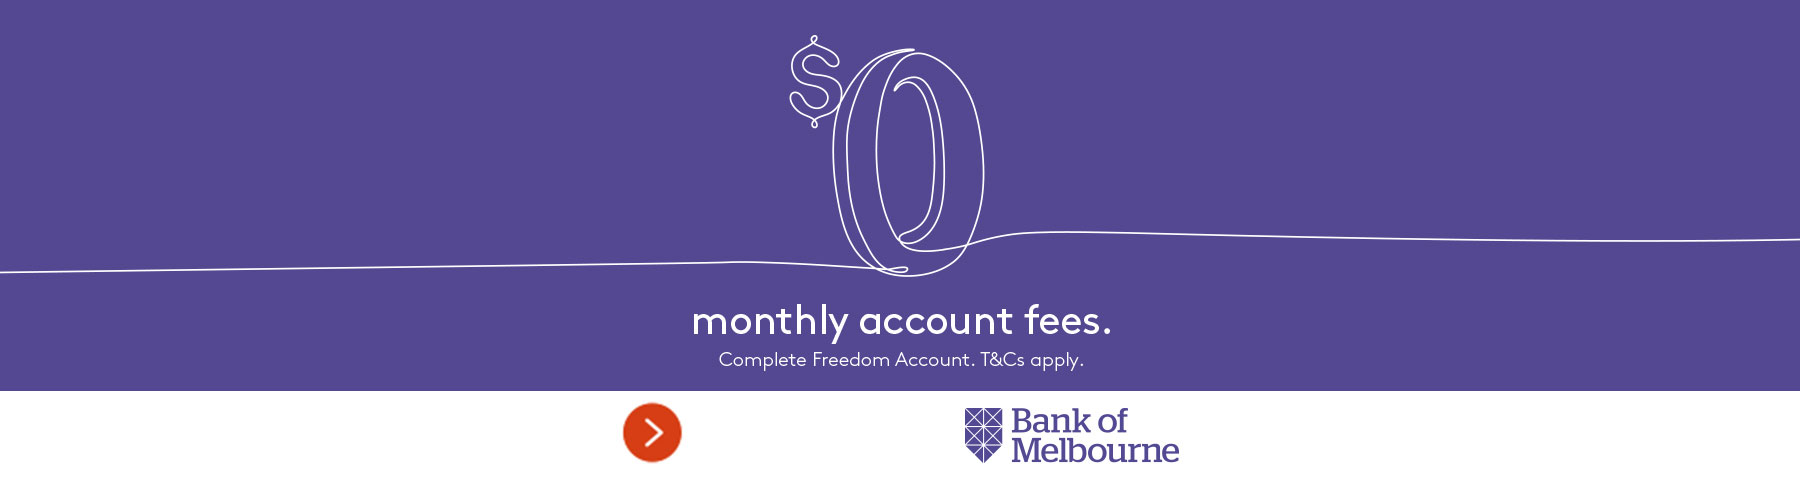 Bank of Melbourne Complete Freedom